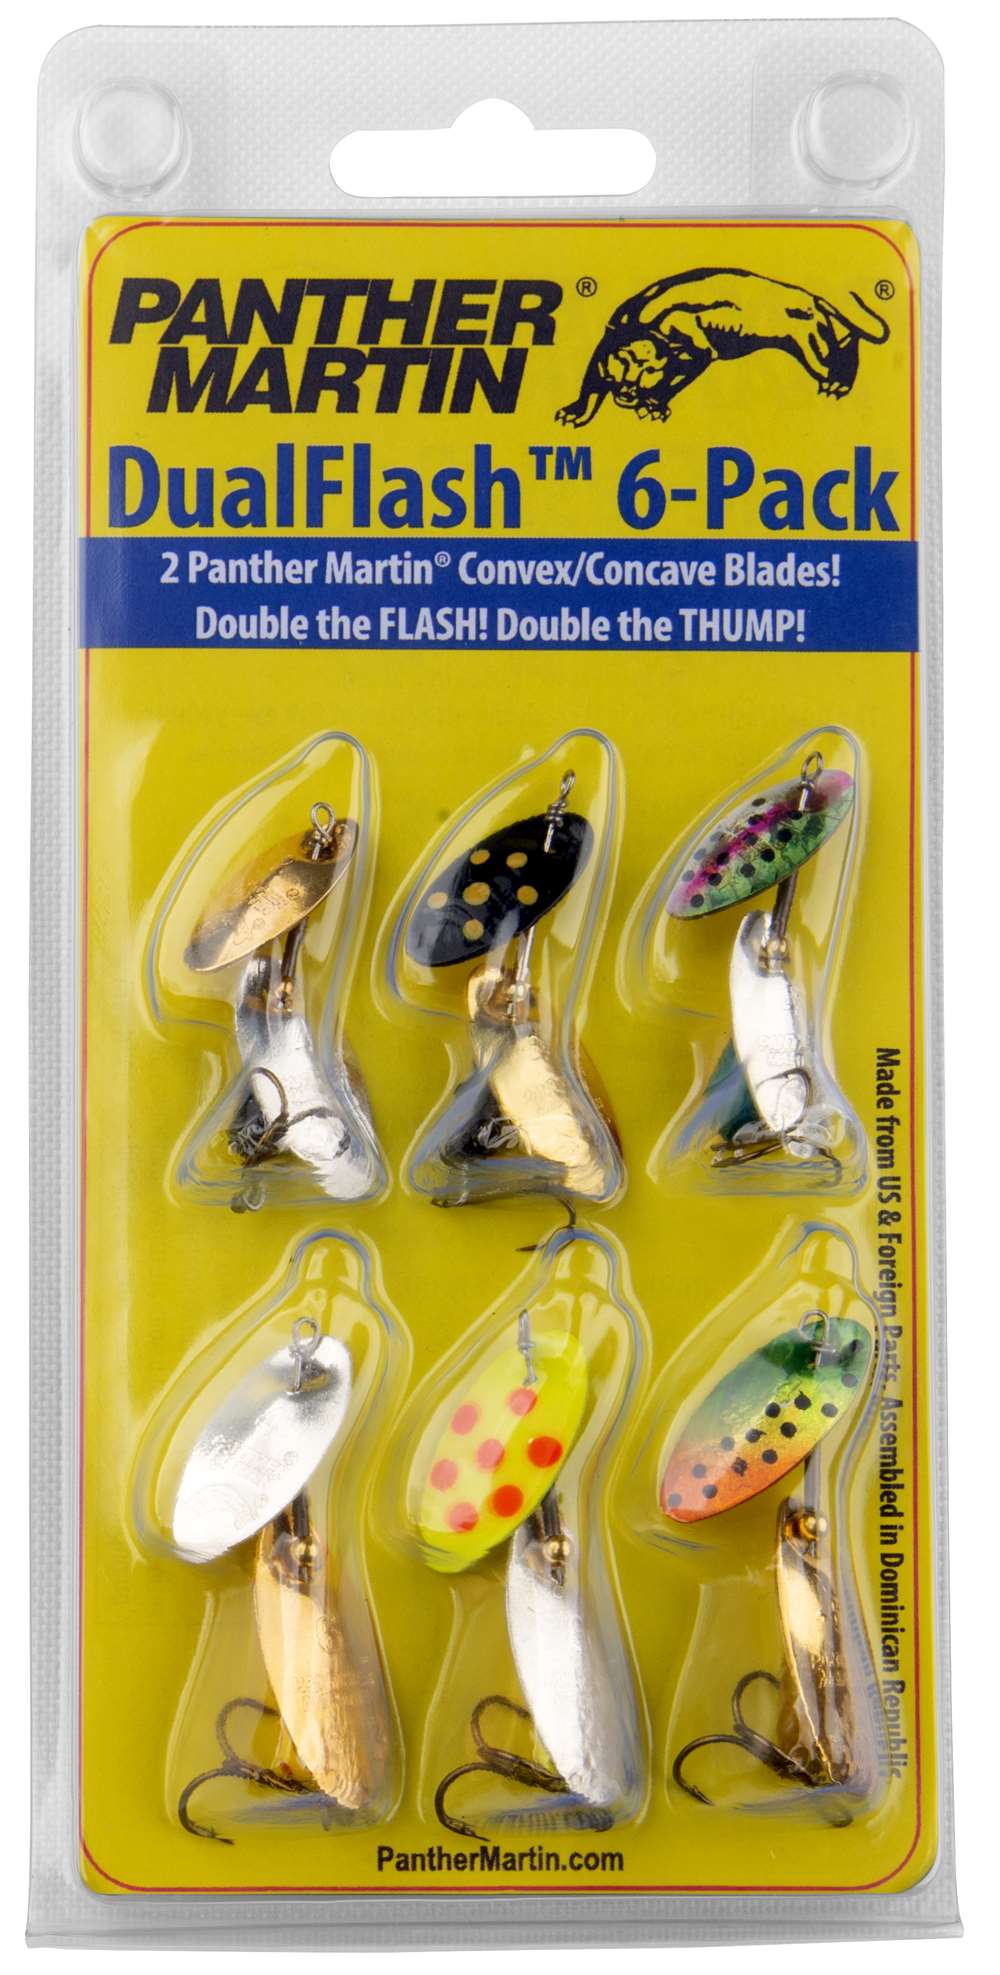 Panther Martin Bass & Trout Annihilators 6 Pack - Great Spinning